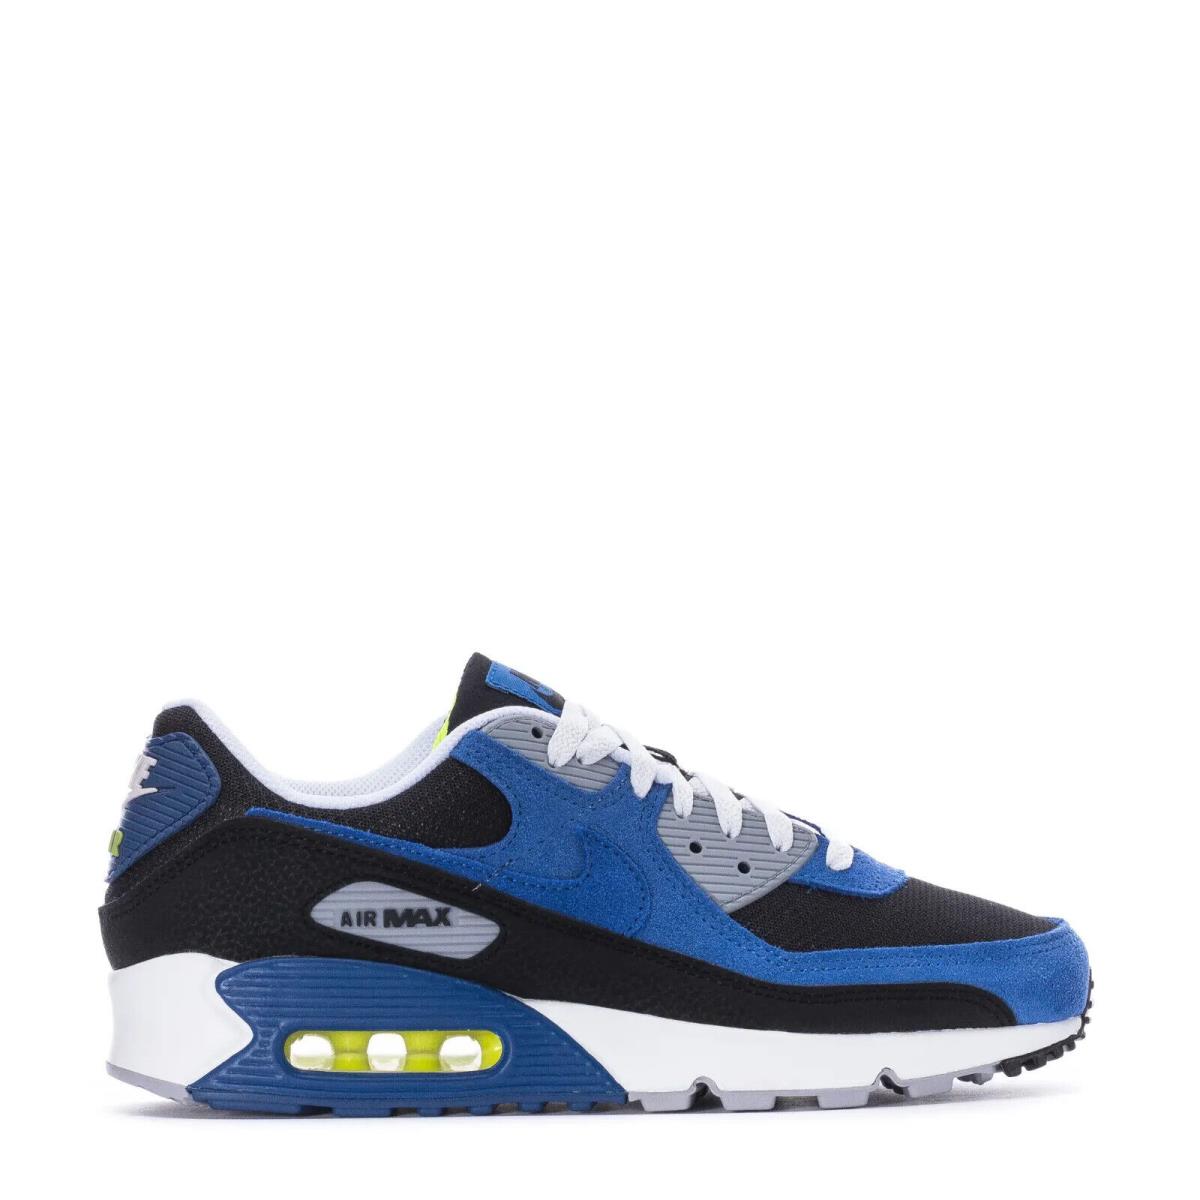 Men`s Nike Air Max 90 Shoes Black Blue Yellow White Sneakers Athletic